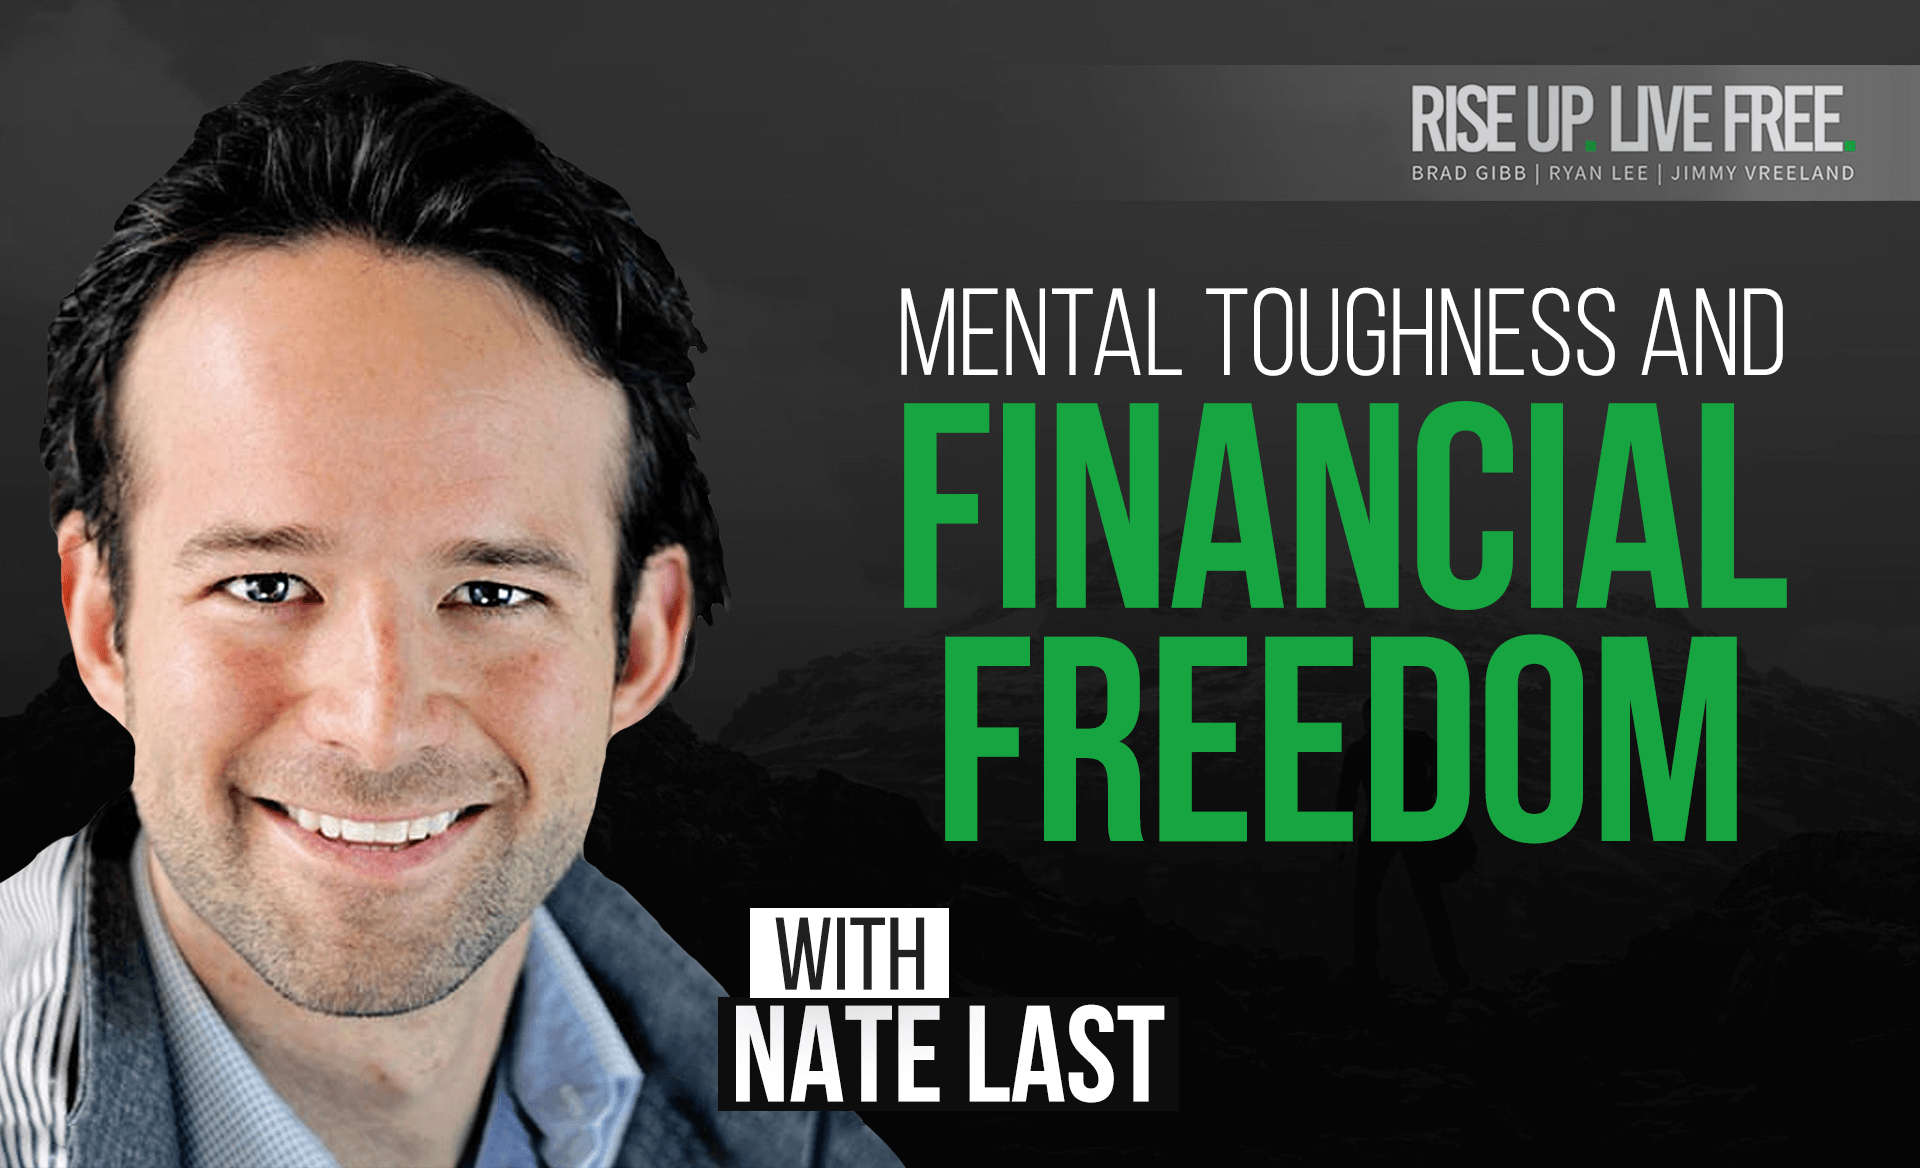 Mental toughness and financial freedom